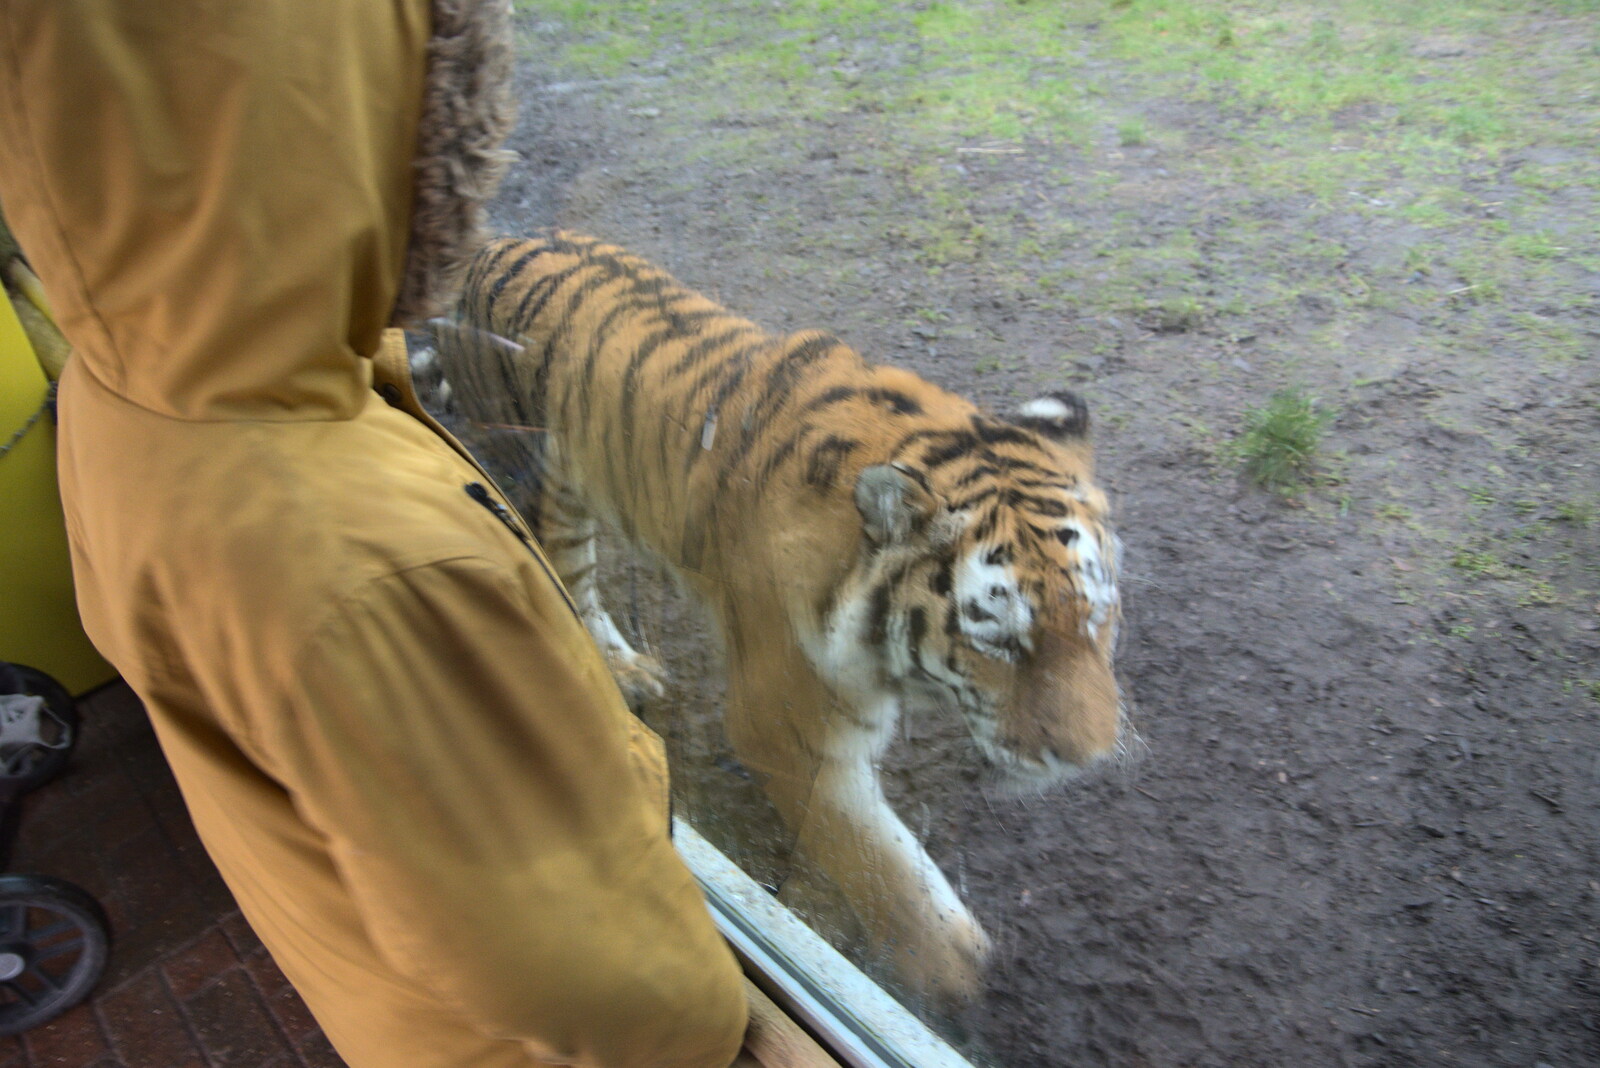 A Few Hours at the Zoo, Banham, Norfolk - 8th January 2023: A tiger gets close to Harry